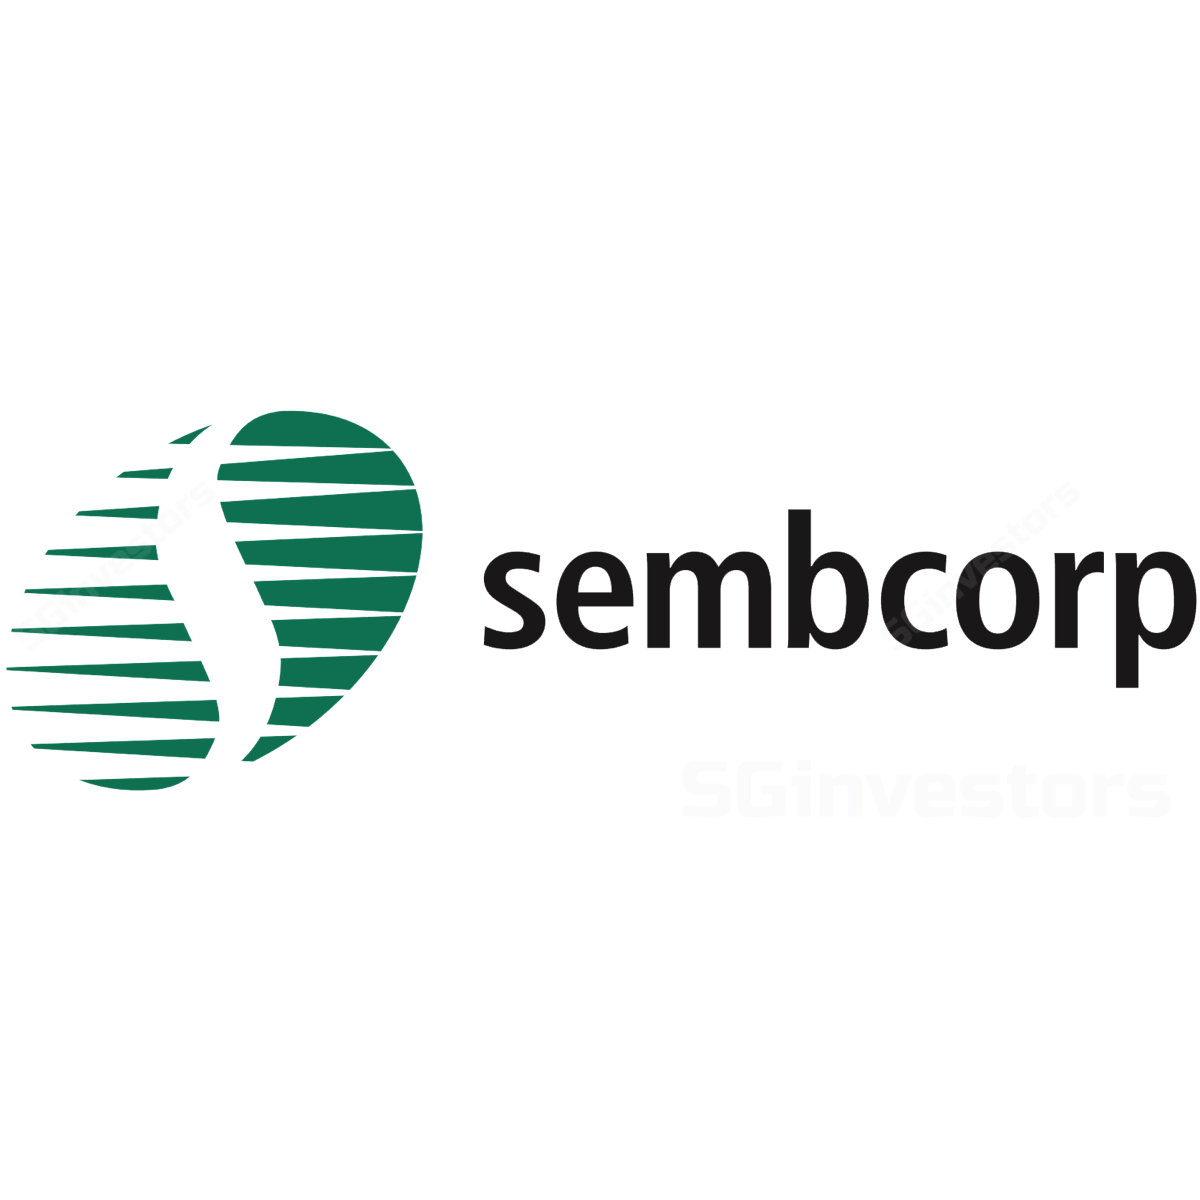 Sembcorp Industries (SCI SP) - UOB Kay Hian 2017-04-04: Refinancing SGPL For A More Positive Outcome